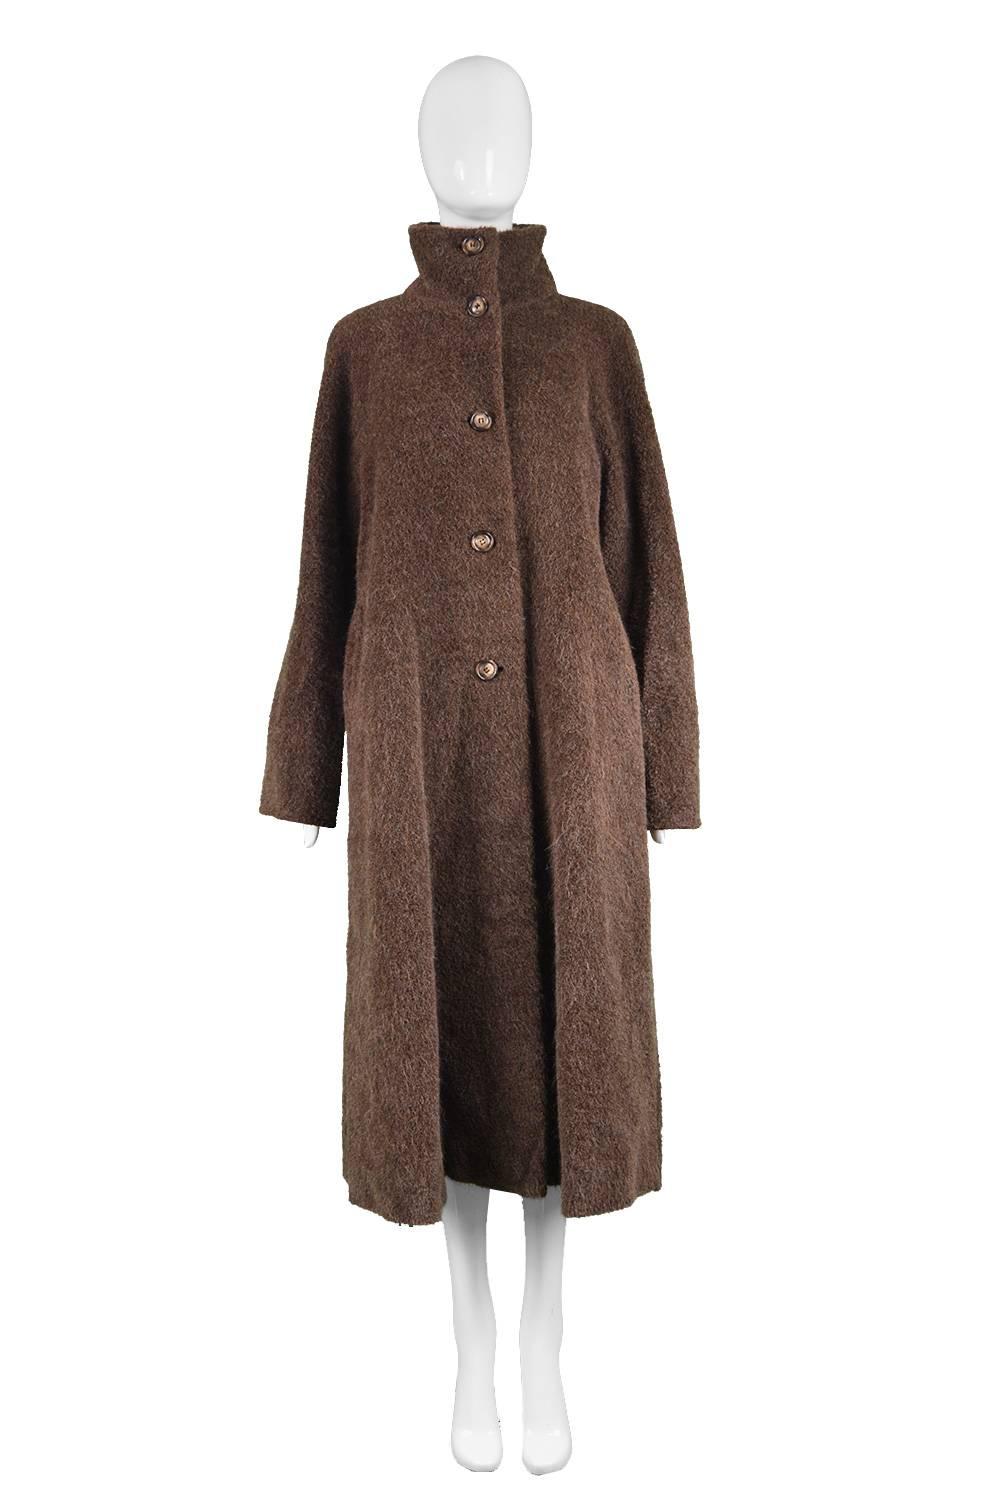 A beautiful vintage women's swing coat by luxury designer, Max Mara. In a luxurious, fuzzy brown alpaca wool and virgin wool with a high funnel neck that adds a chic, high fashion look whilst staying classic. Perfect for fall and